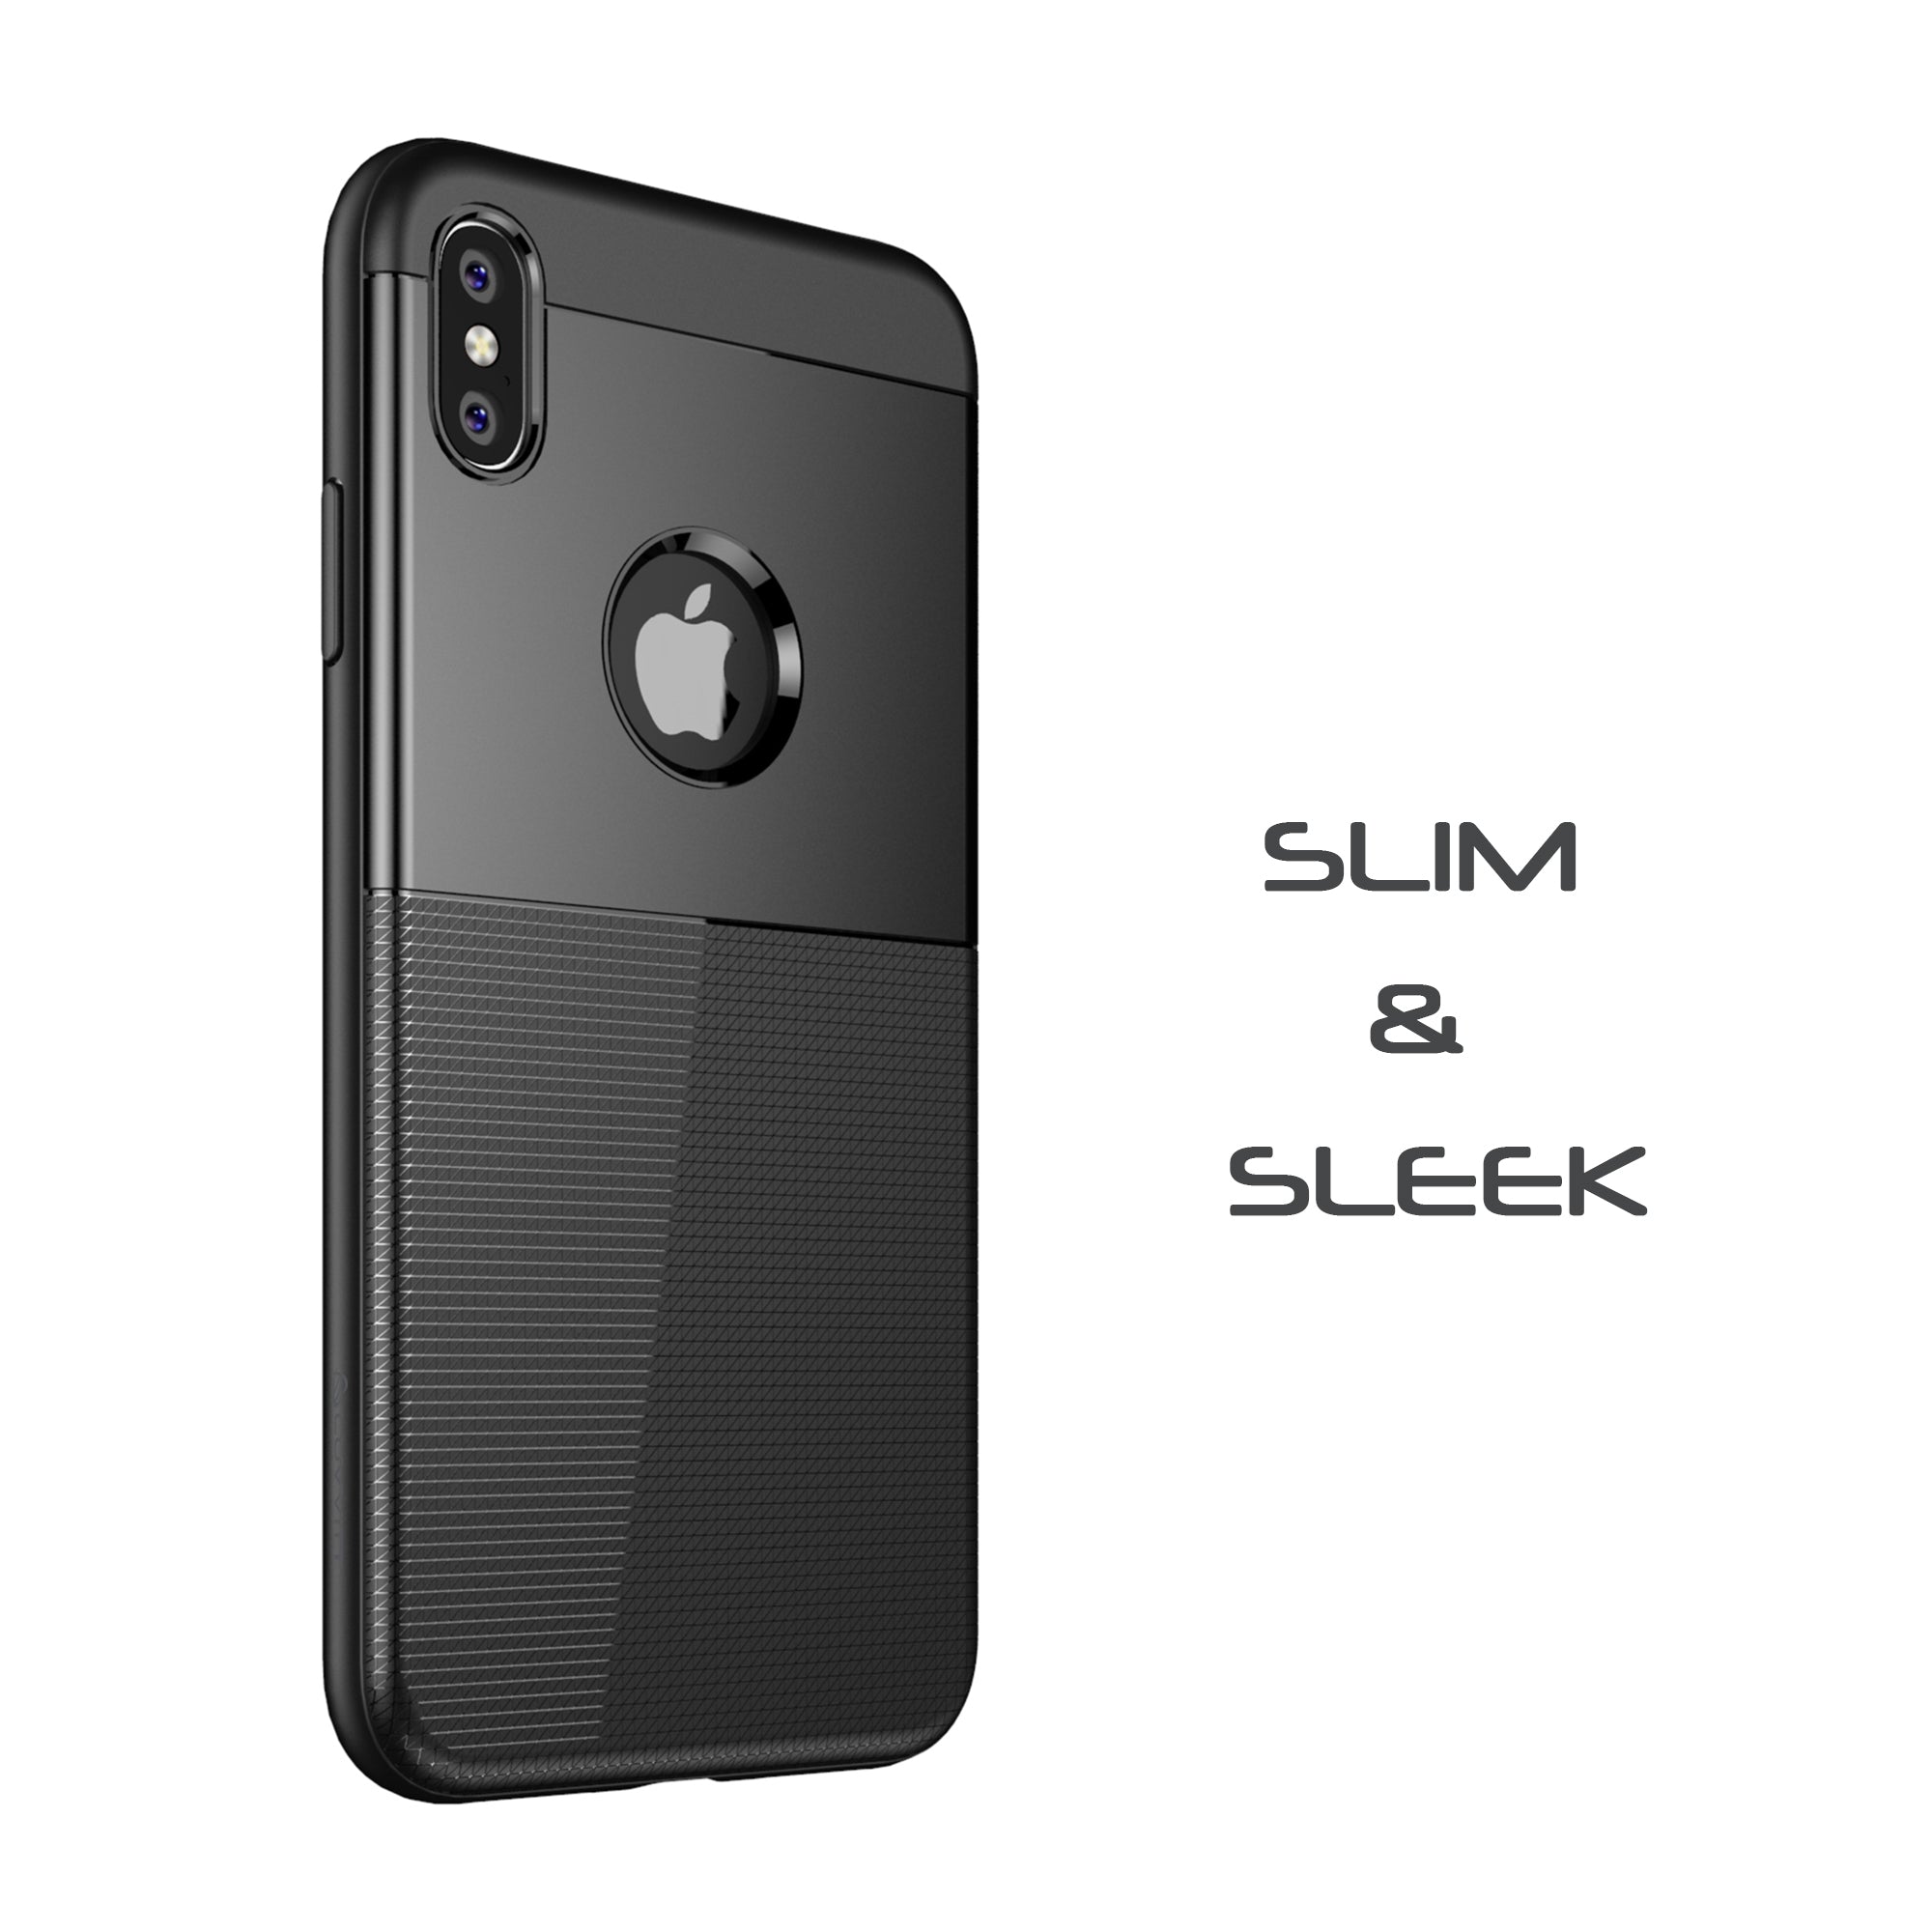 Luvvitt iPhone XS Max Case Sleek Armor Cover for 6.5 inch Screen 2018 - Black